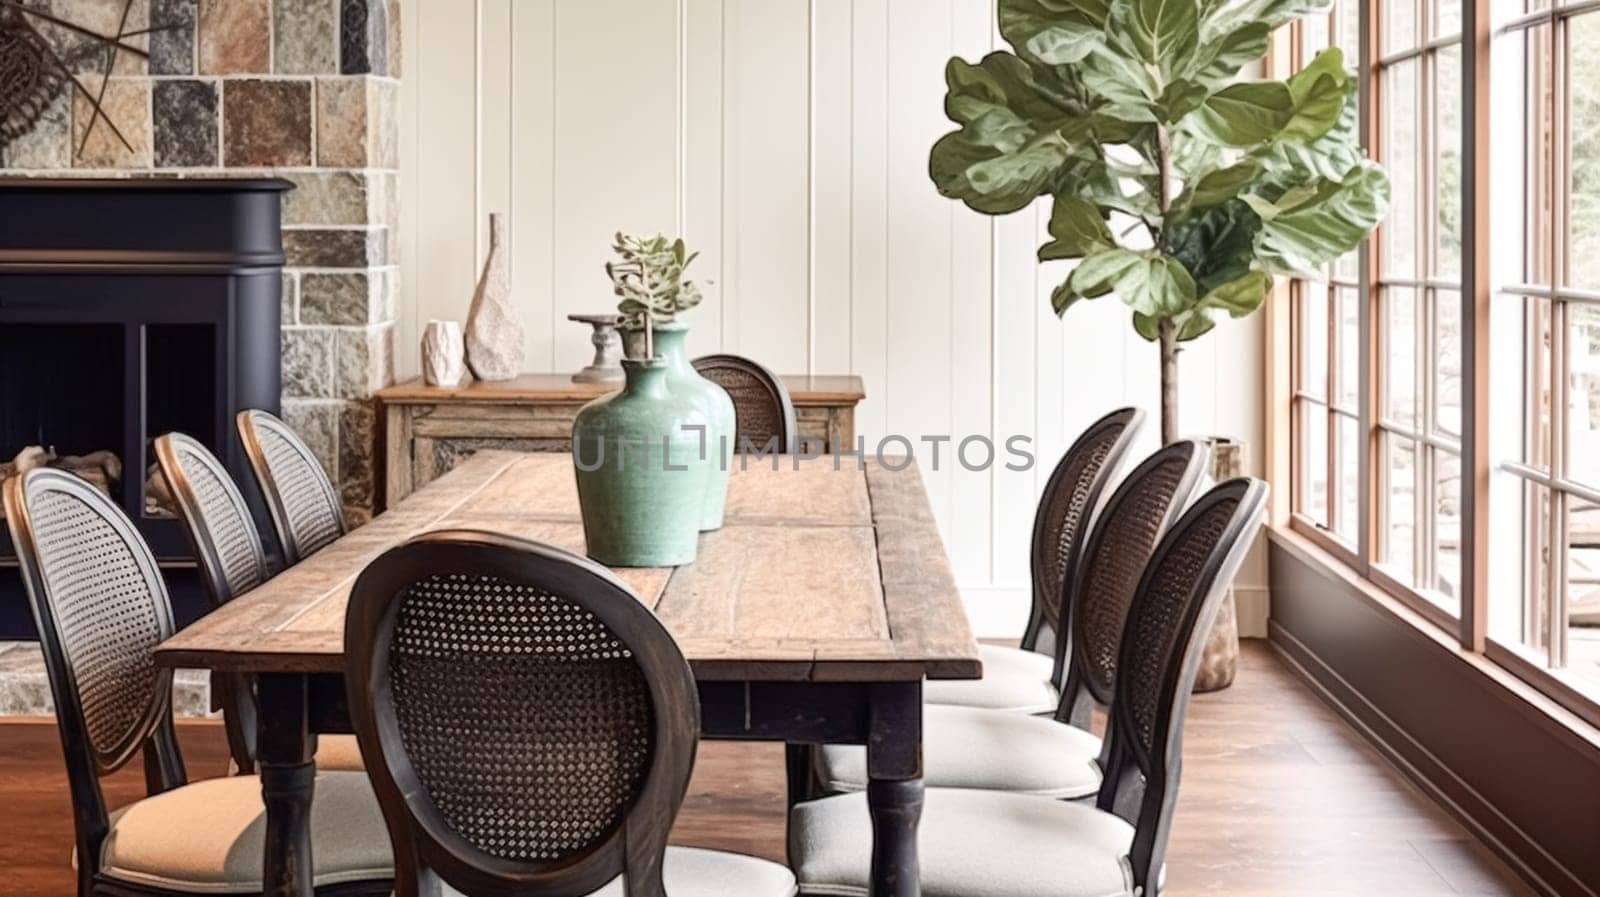 Wooden cottage dining room decor, interior design and country house furniture, home decor, table and chairs, English countryside style interiors